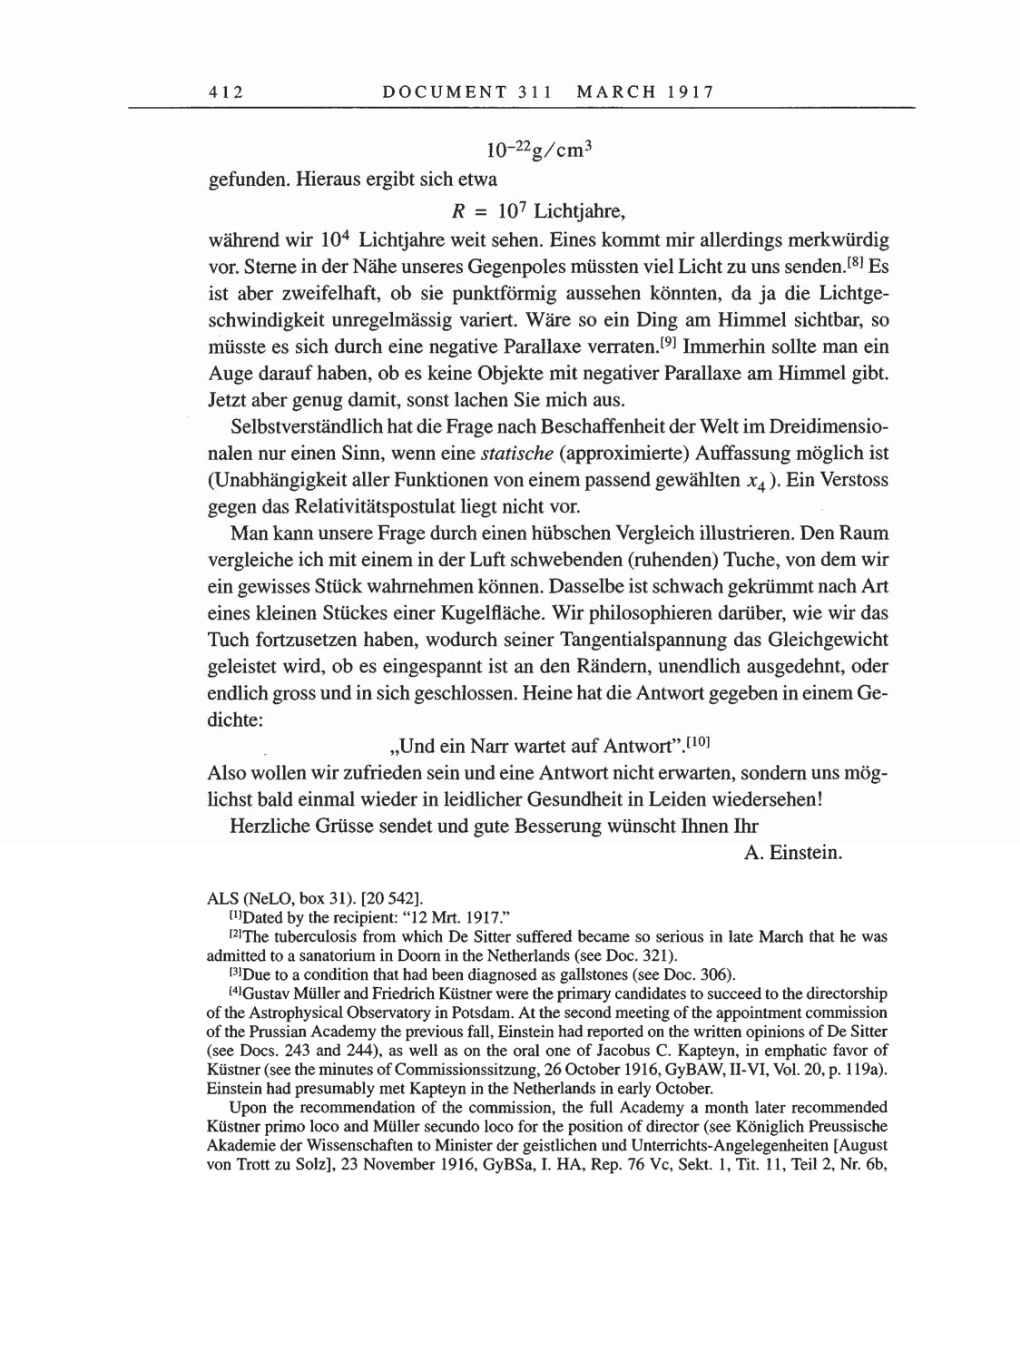 Volume 8, Part A: The Berlin Years: Correspondence 1914-1917 page 412